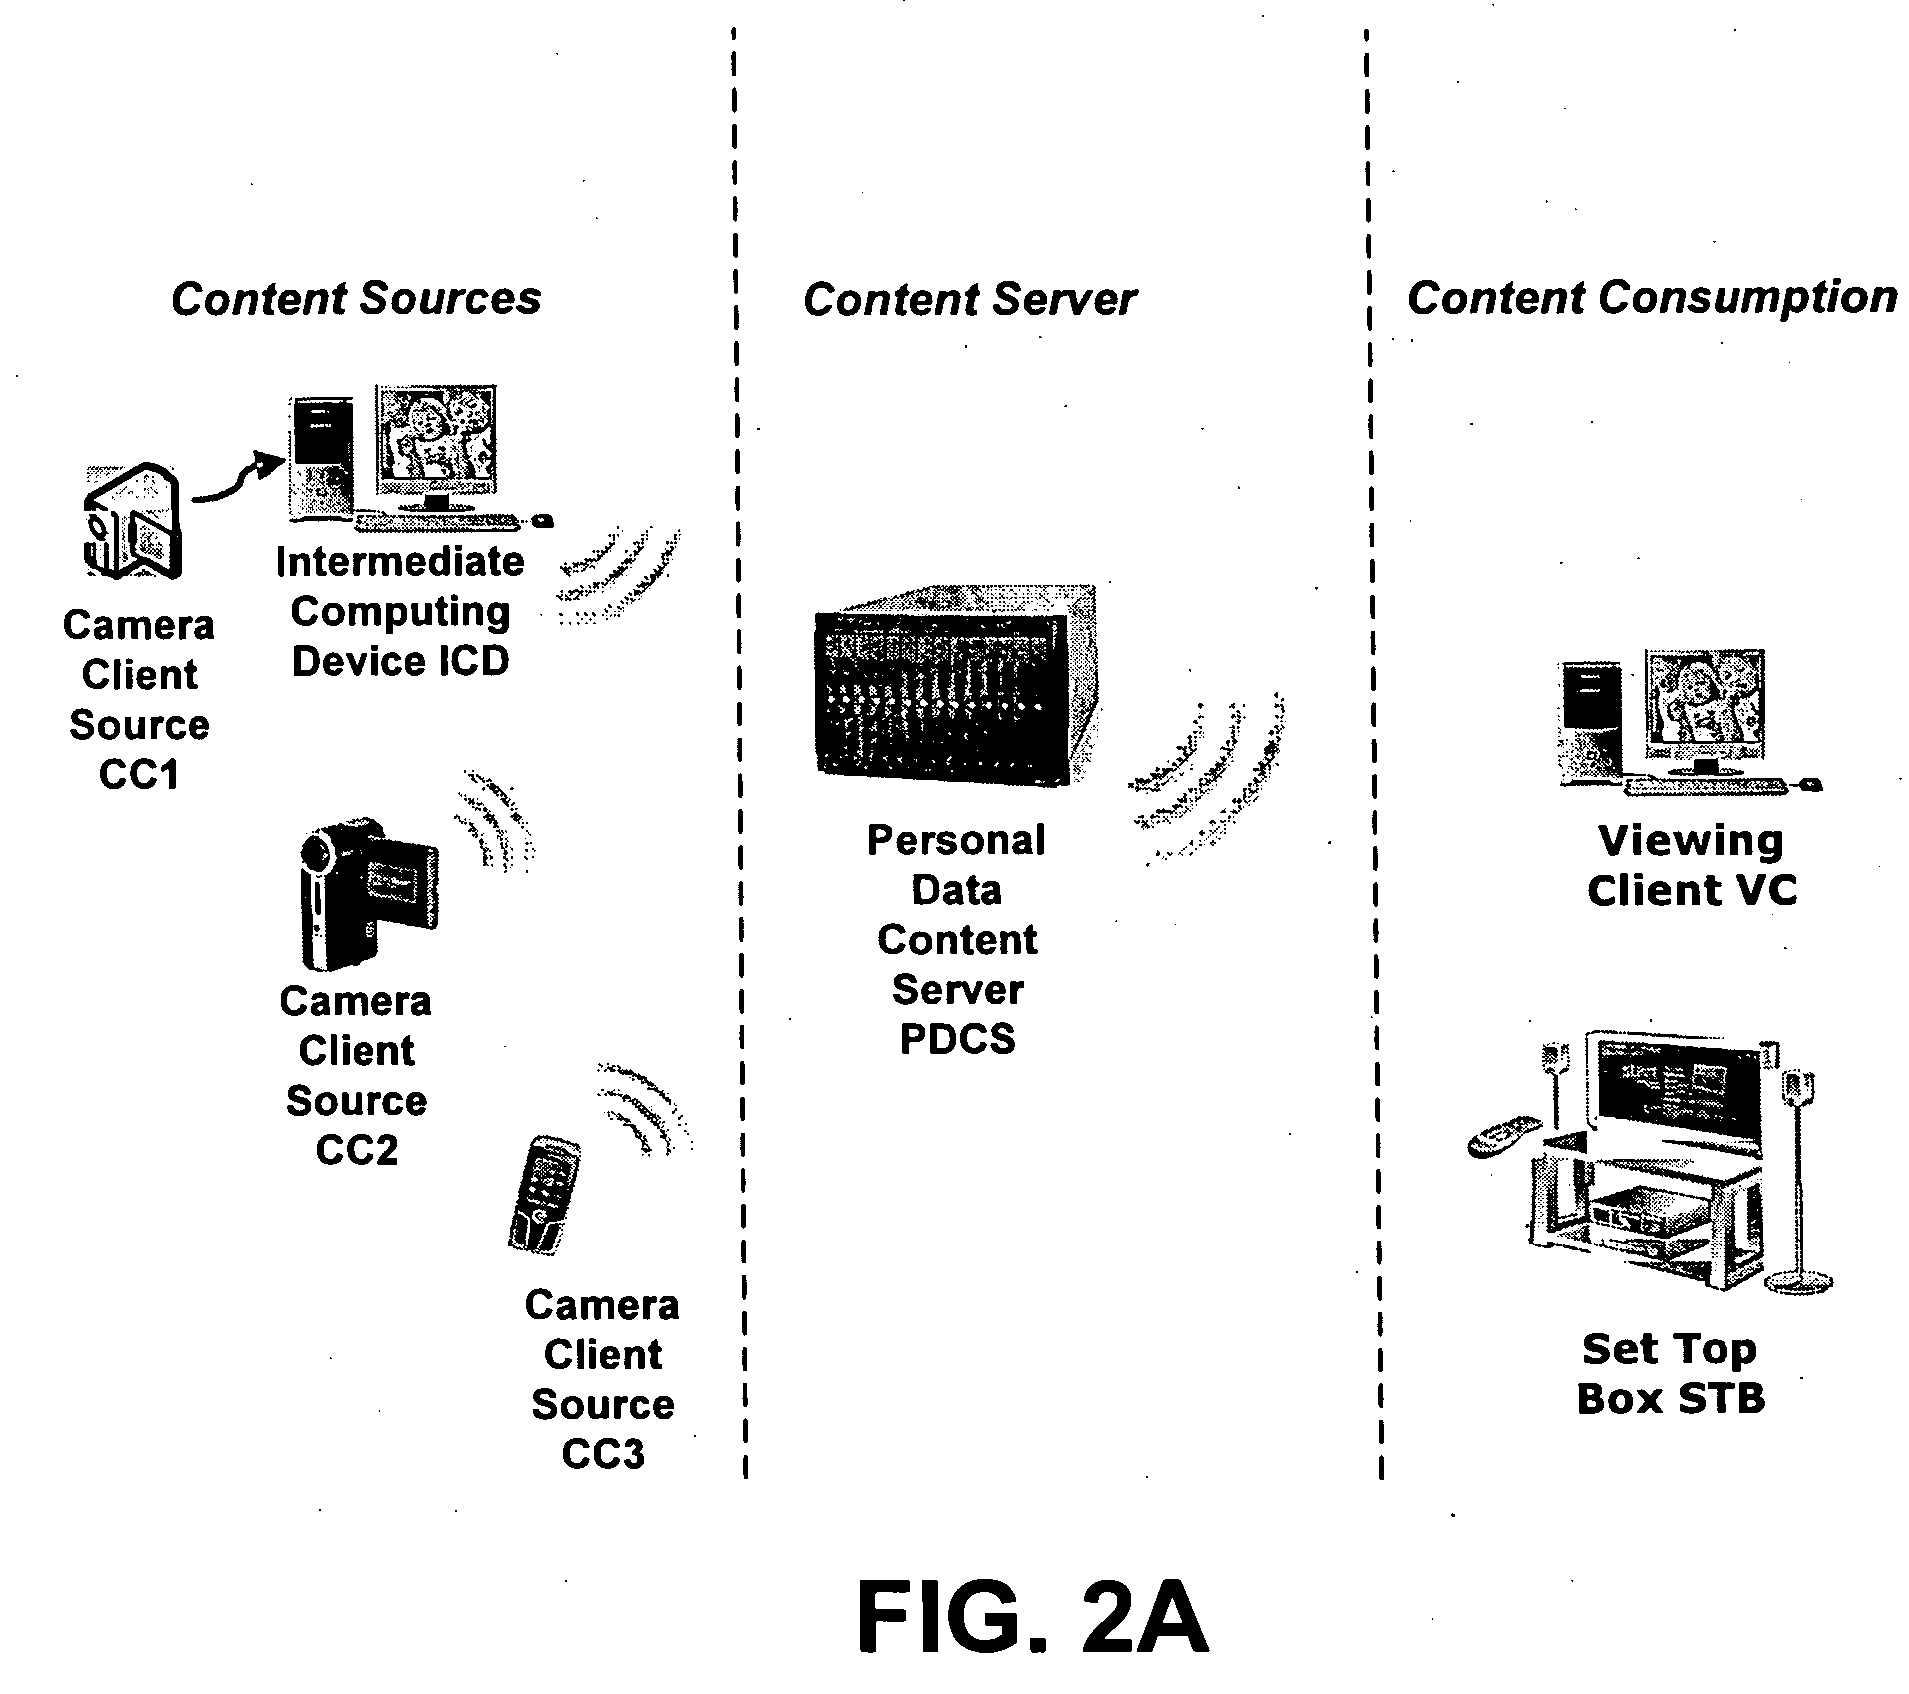 Techniques for transmitting personal data and metadata among computing devices